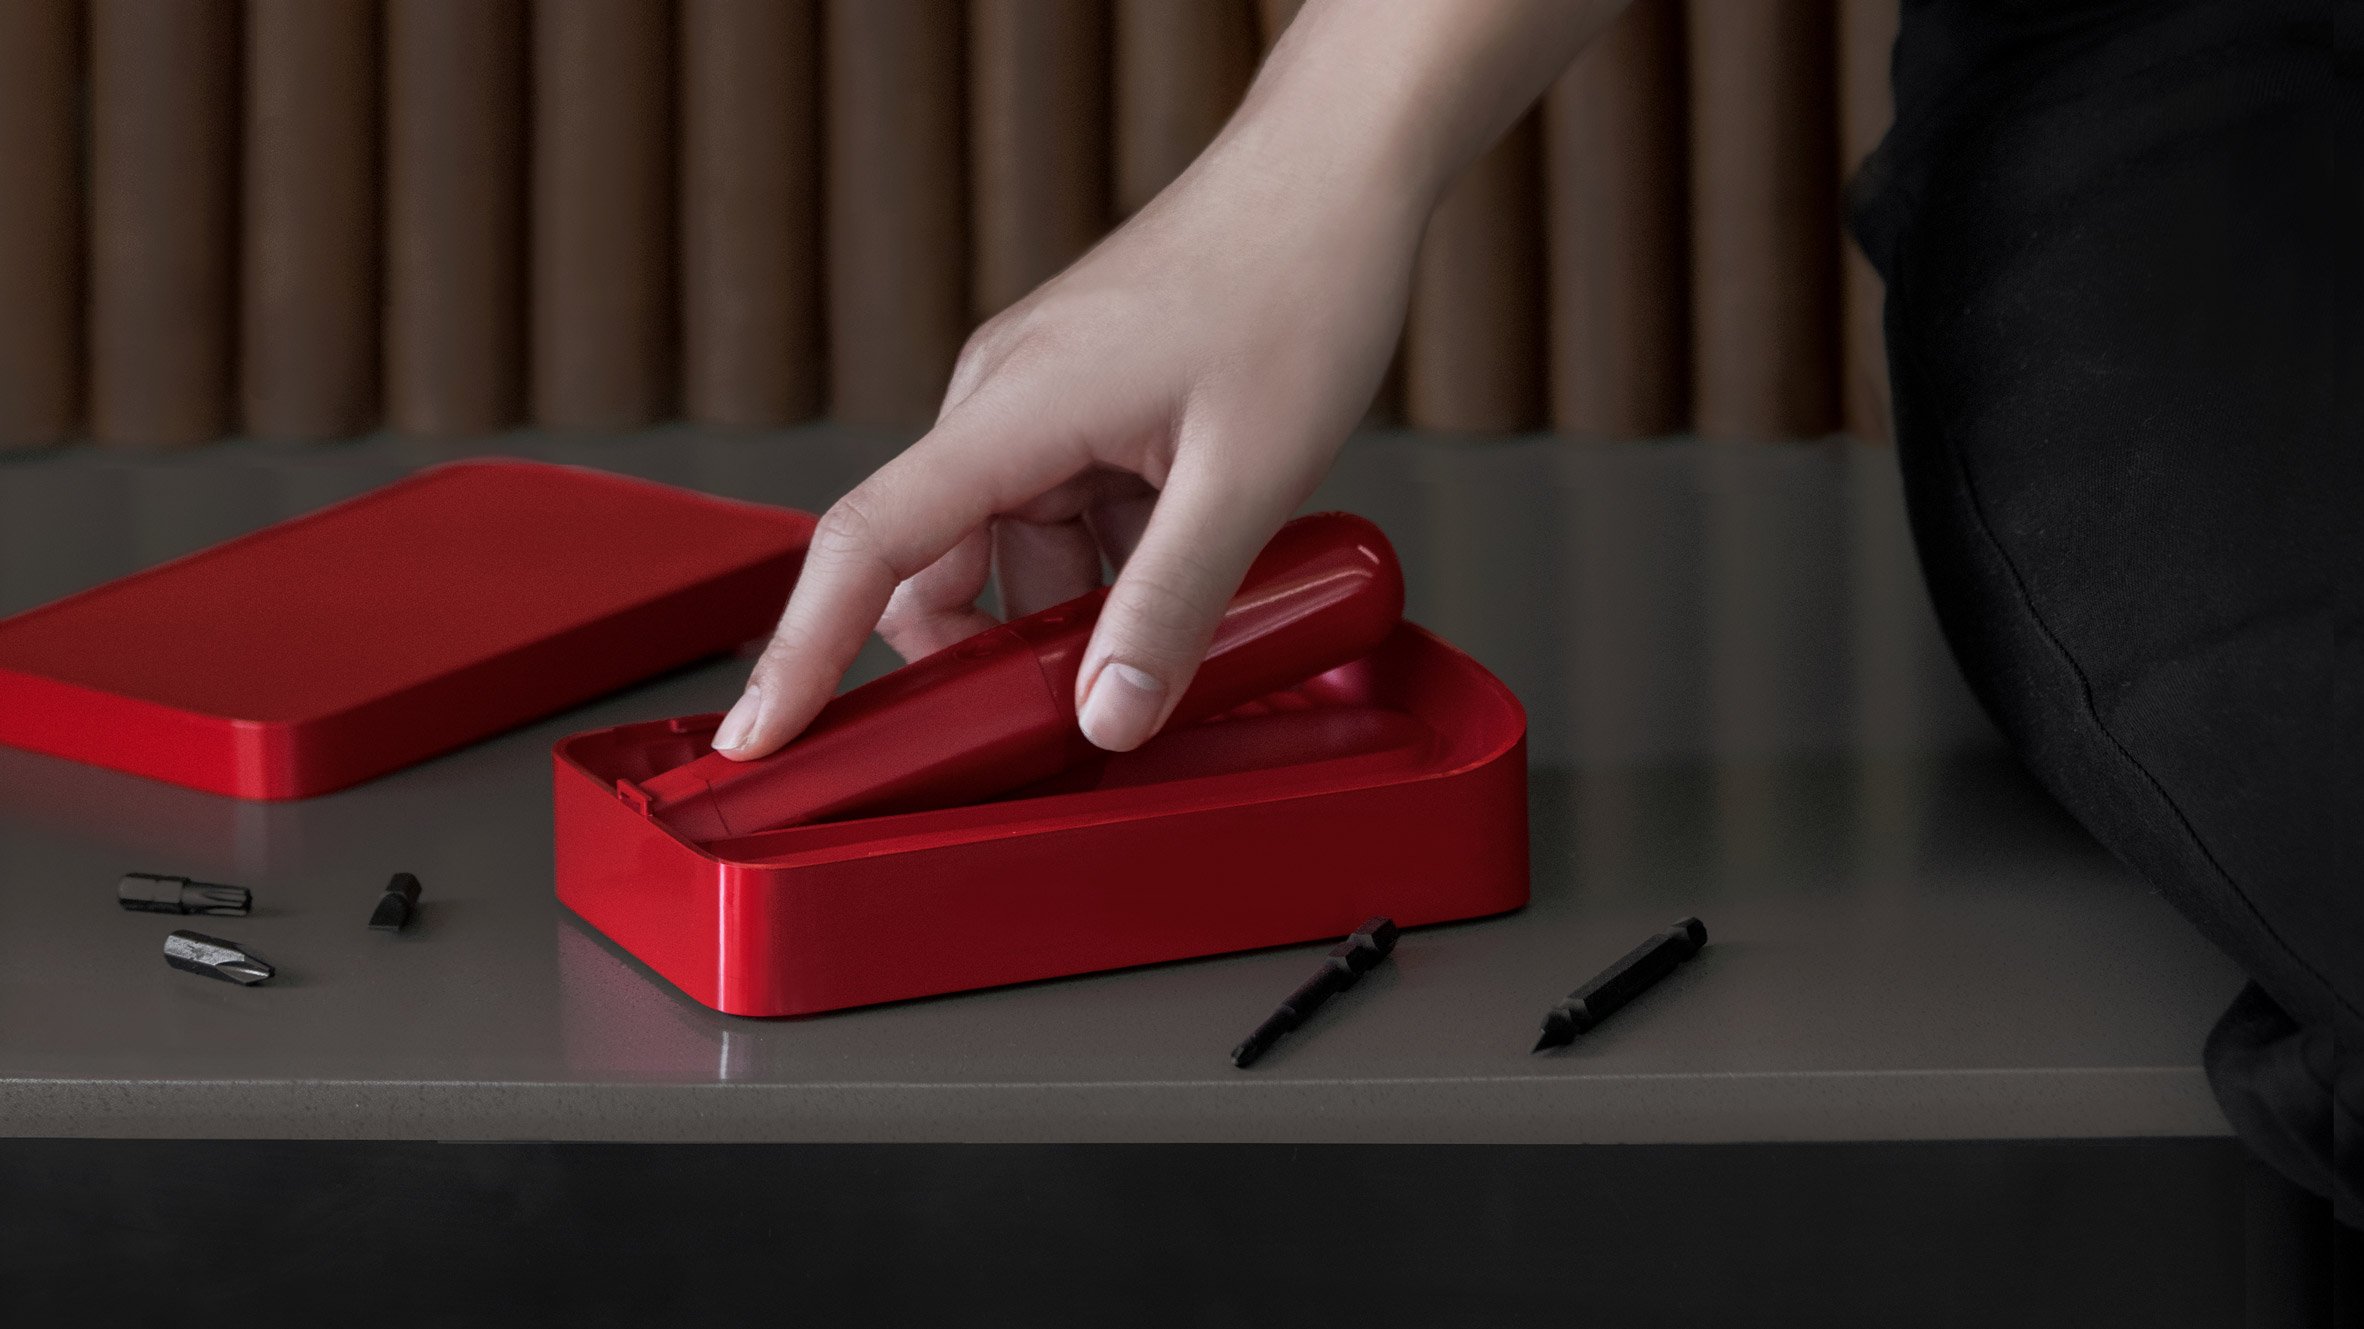 Minimalist Home Tool drill is designed to be unintimidating